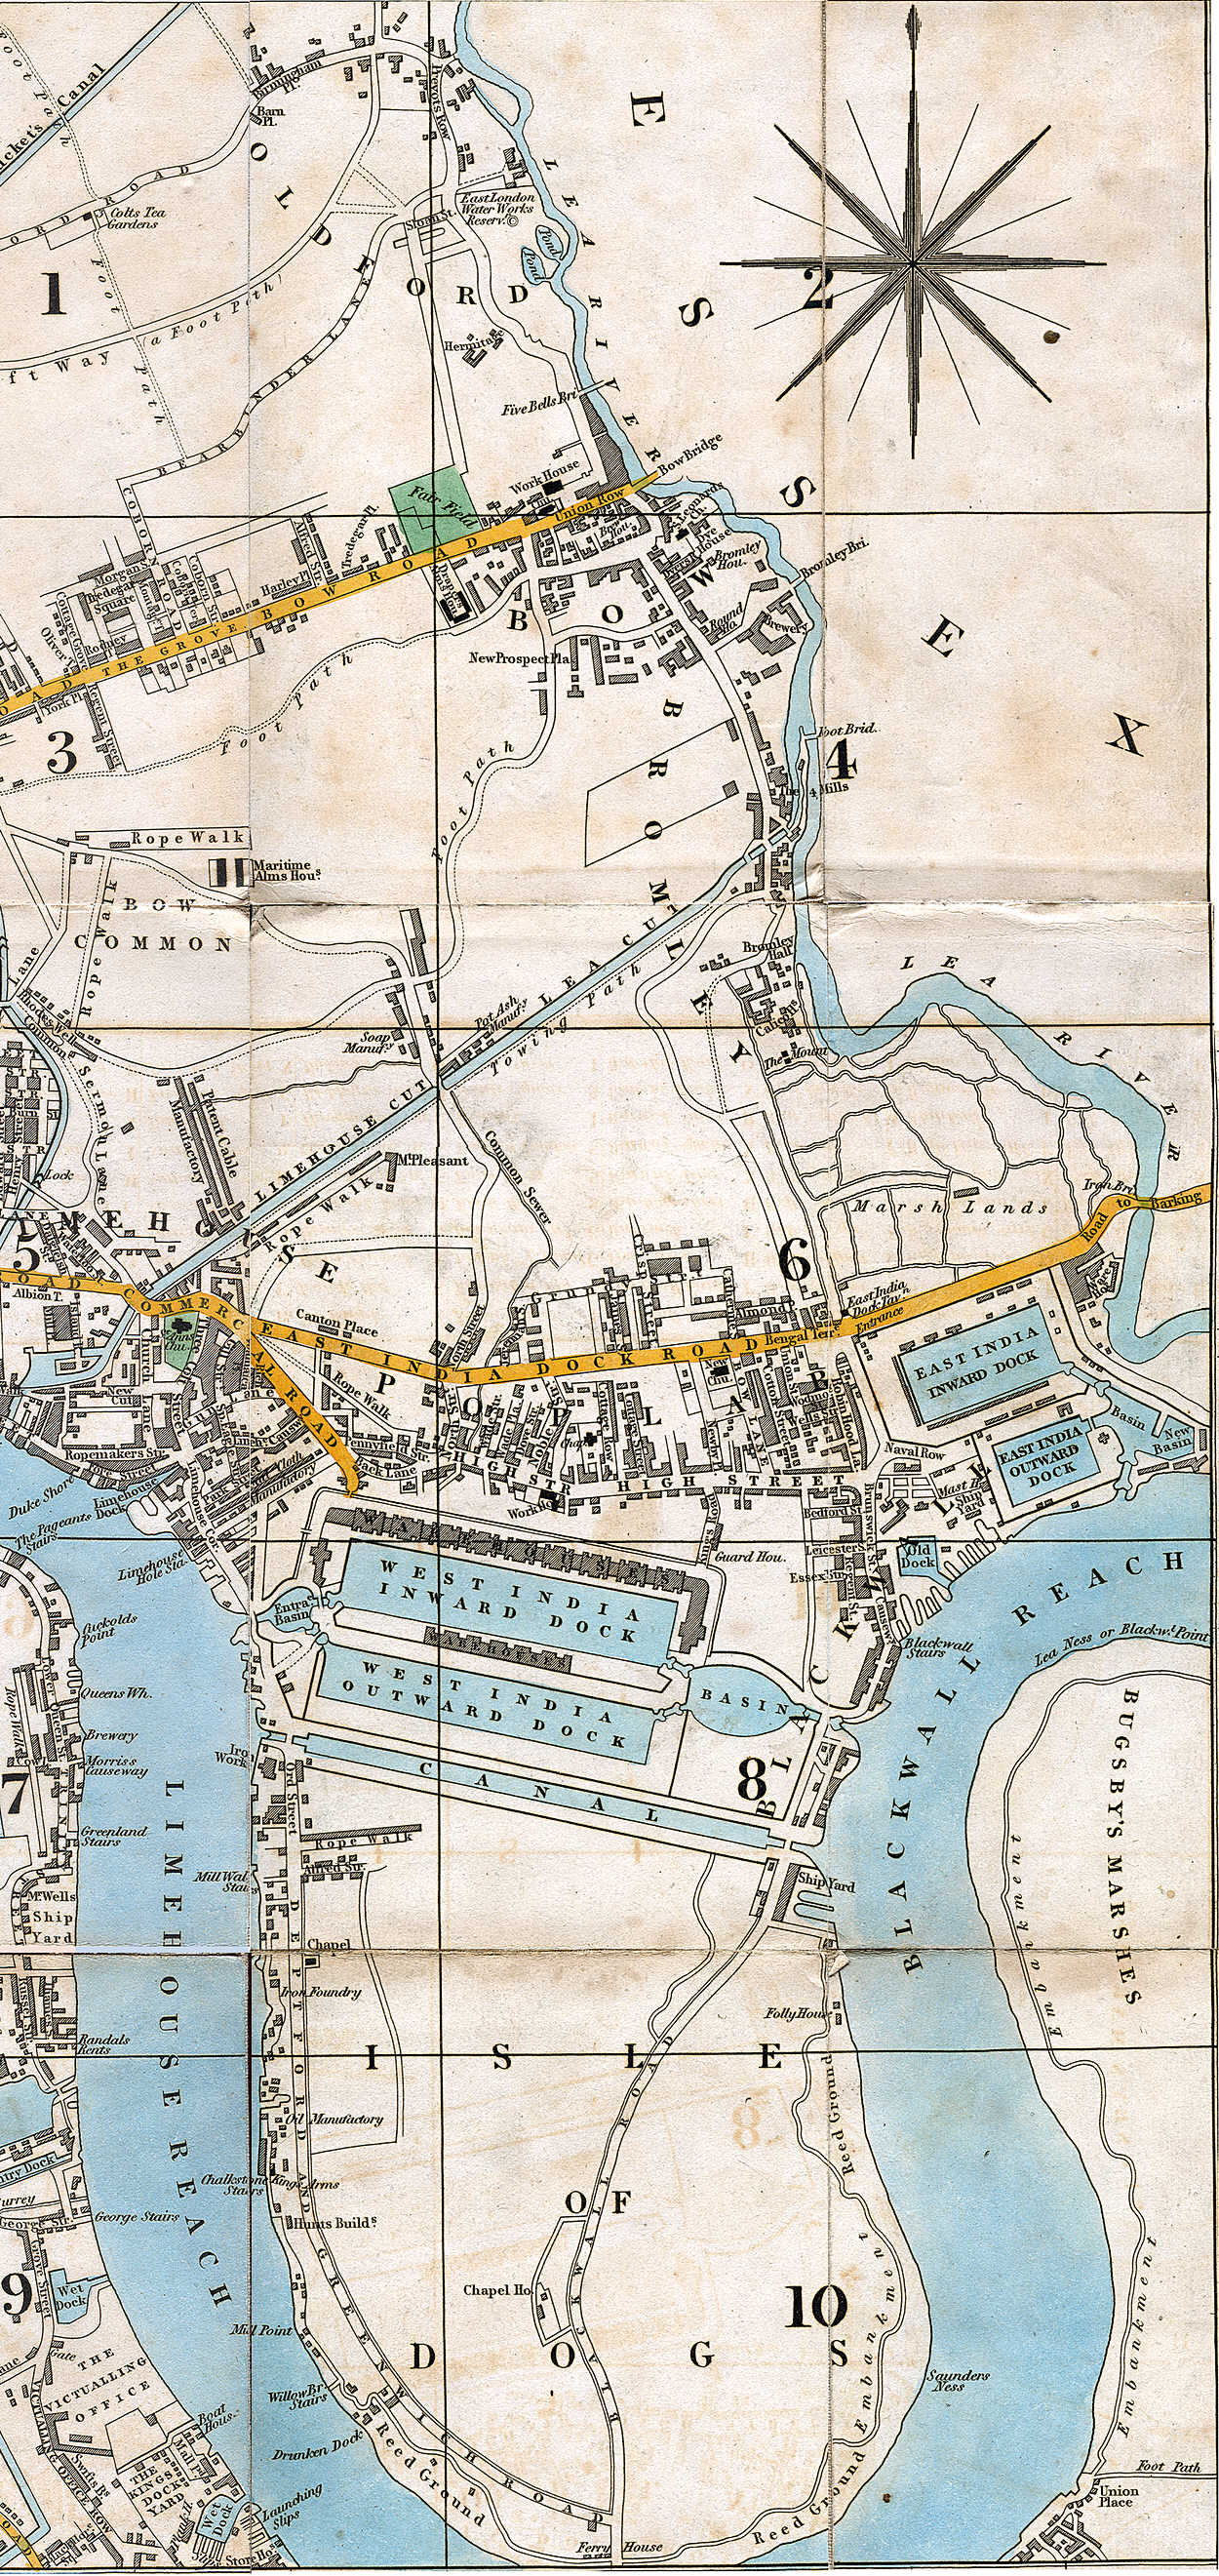 1831 - Crutchley, "New Plan of London"